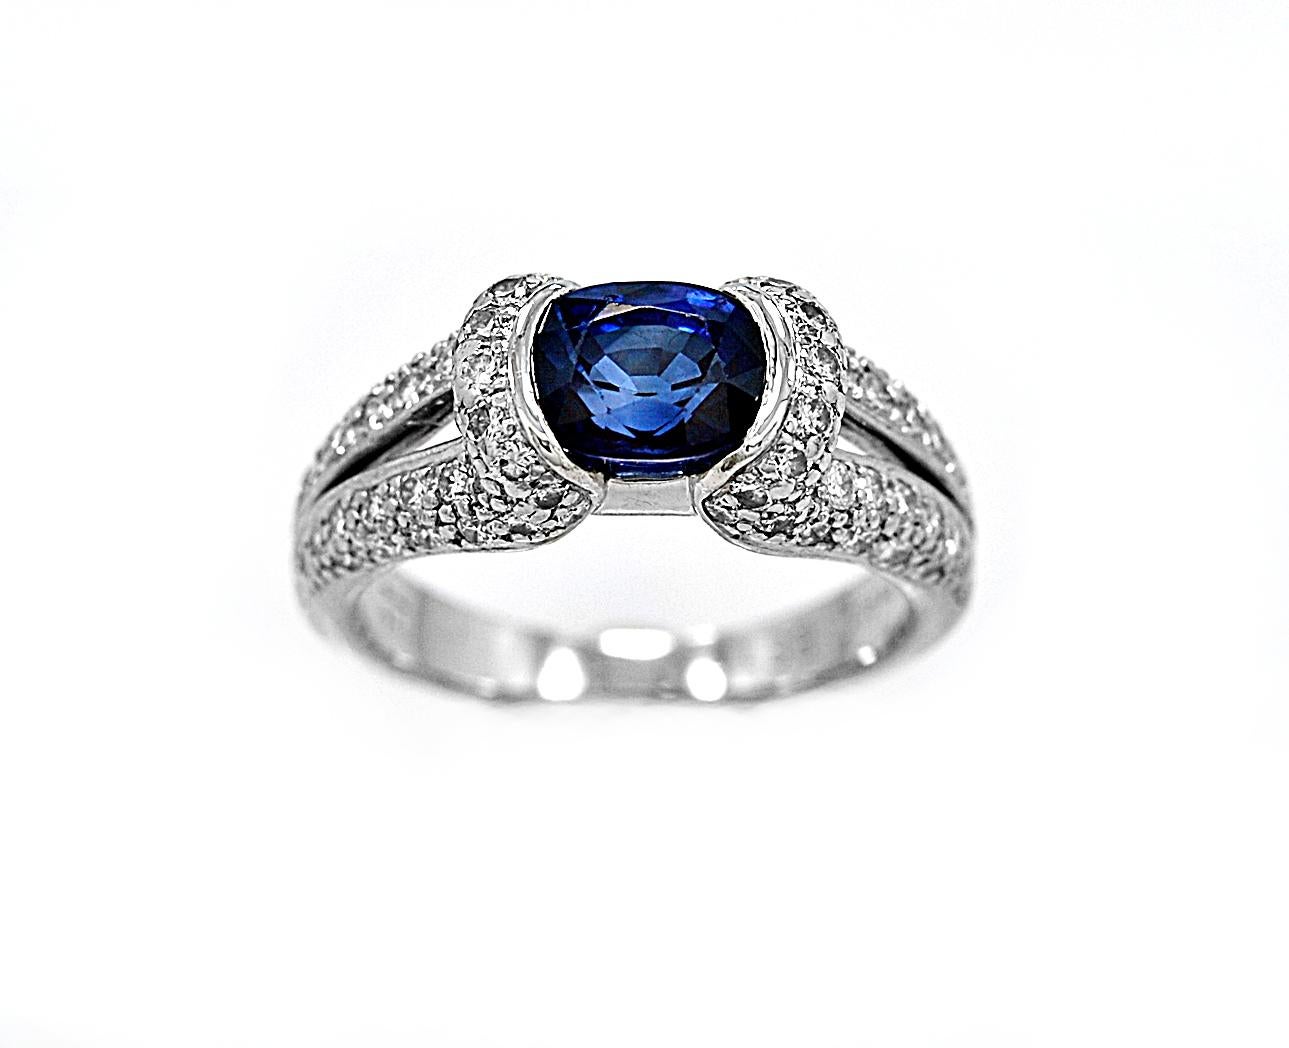 An estate engagement-fashion ring created by the well-known maker Eichhorn which features a 1.75ct. apx. beautiful blue oval sapphire with 1.00ct. apx. T.W. of accenting diamond melee on a split shank on each side of the center diamond. A